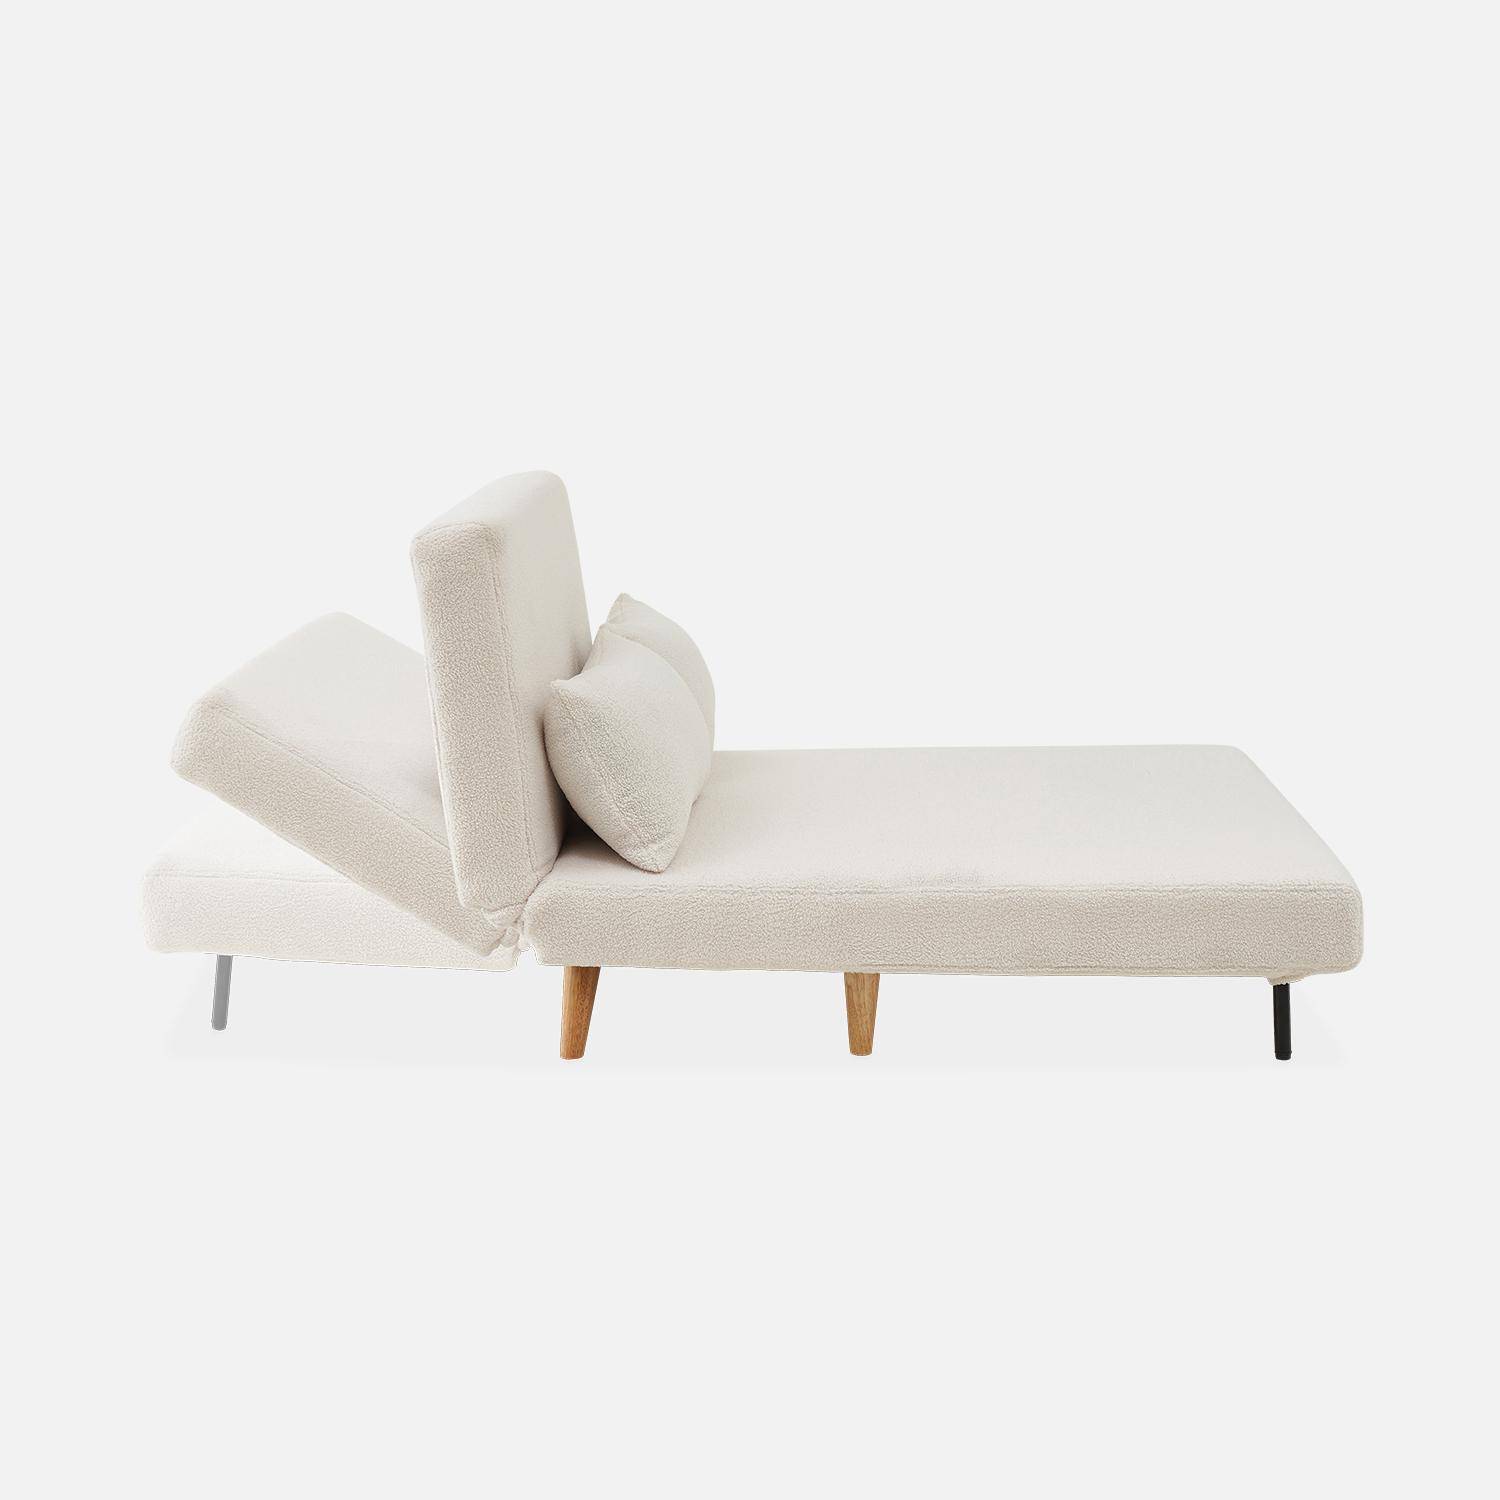 Sleeper, 2-Seater Convertible Sofa with Wooden Legs,  L120xW81xH82cm, white bouclette,sweeek,Photo8